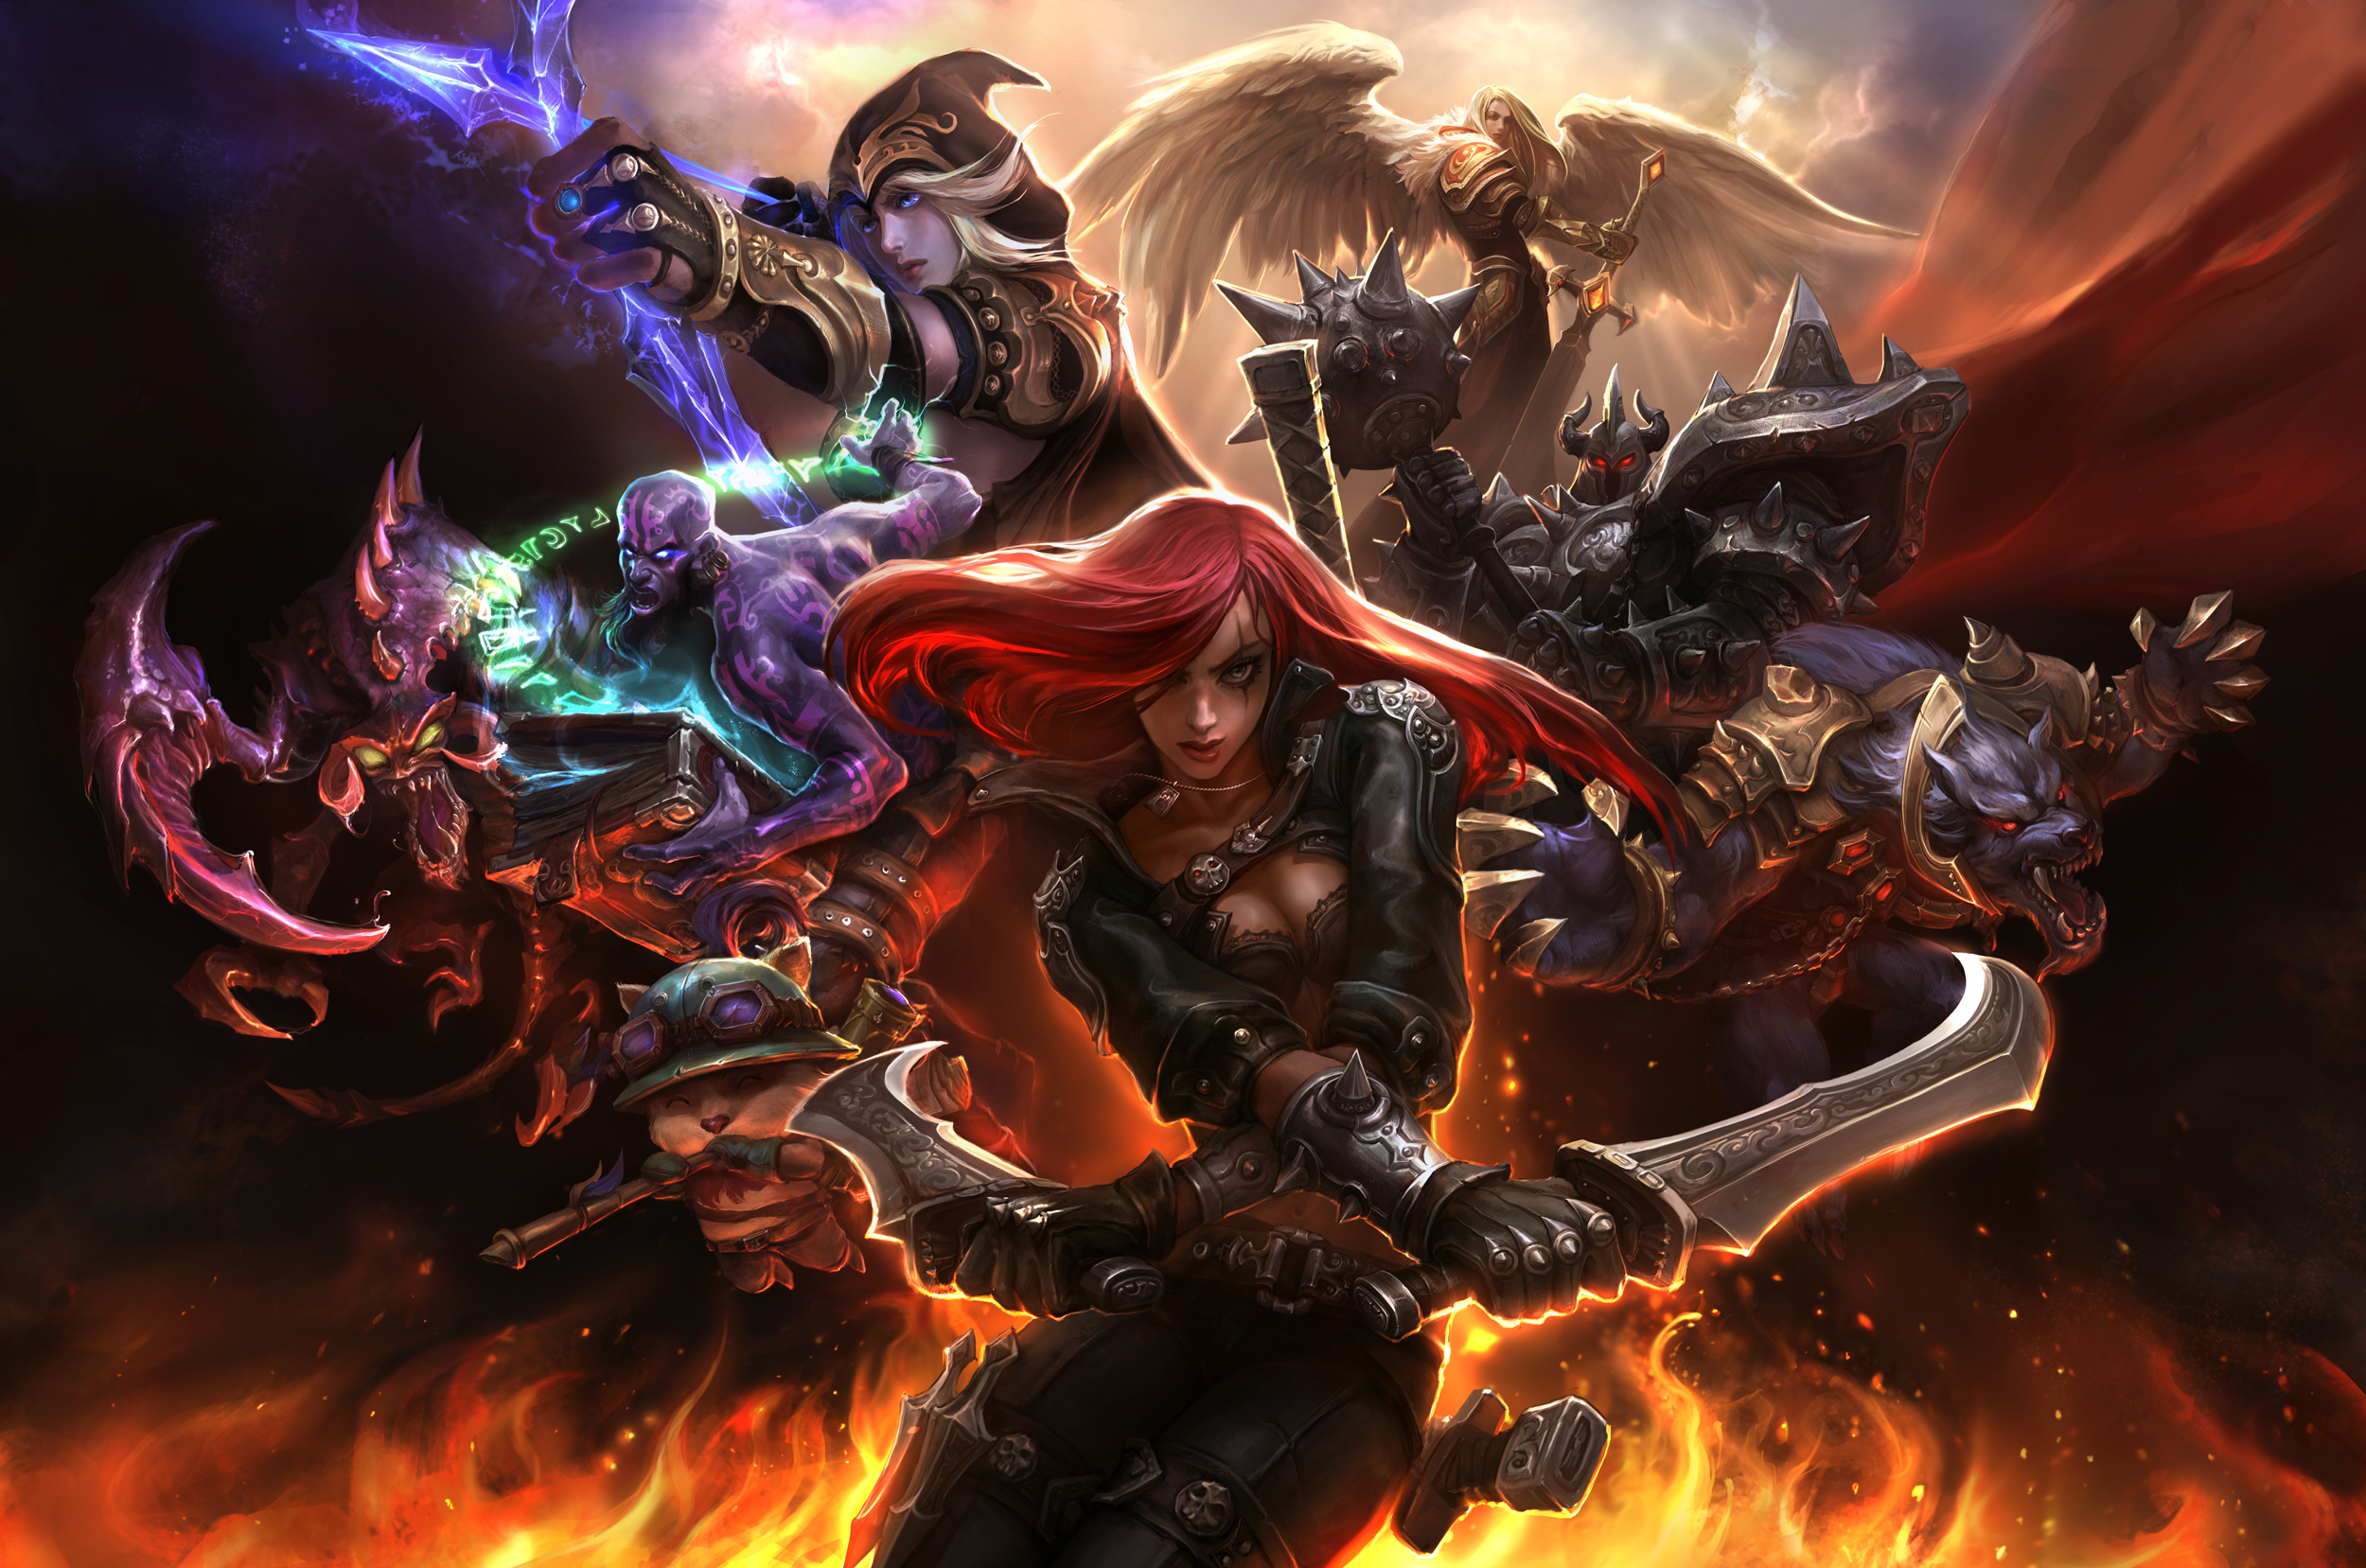 video game, league of legends, ashe (league of legends), cho'gath (league of legends), katarina (league of legends), kayle (league of legends), mordekaiser (league of legends), ryze (league of legends), teemo (league of legends), warwick (league of legends)